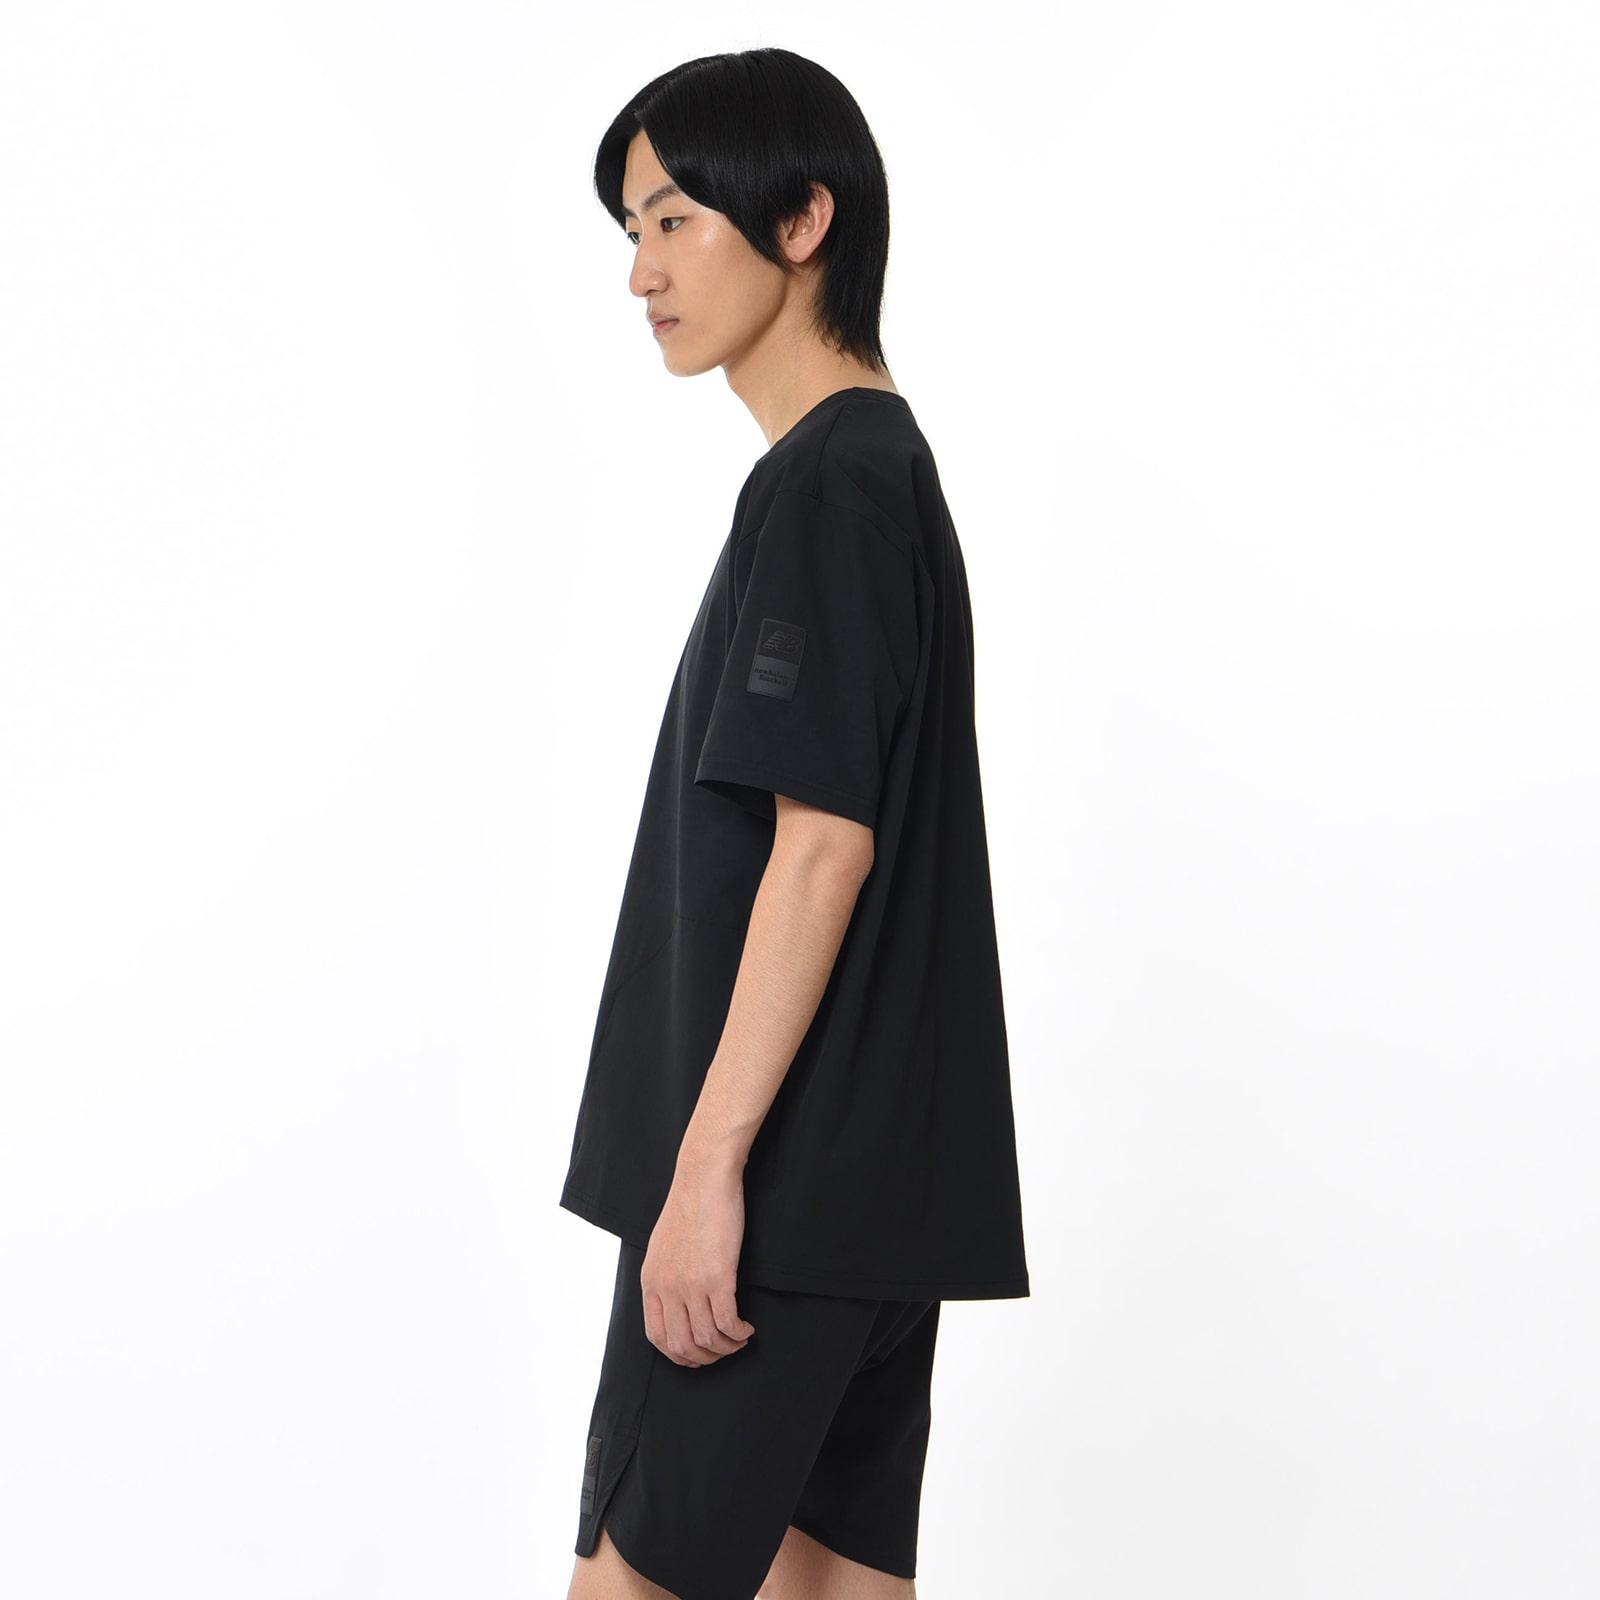 Black Out Collection Premier Collection Stretch Woven Top Short Sleeve Shirt